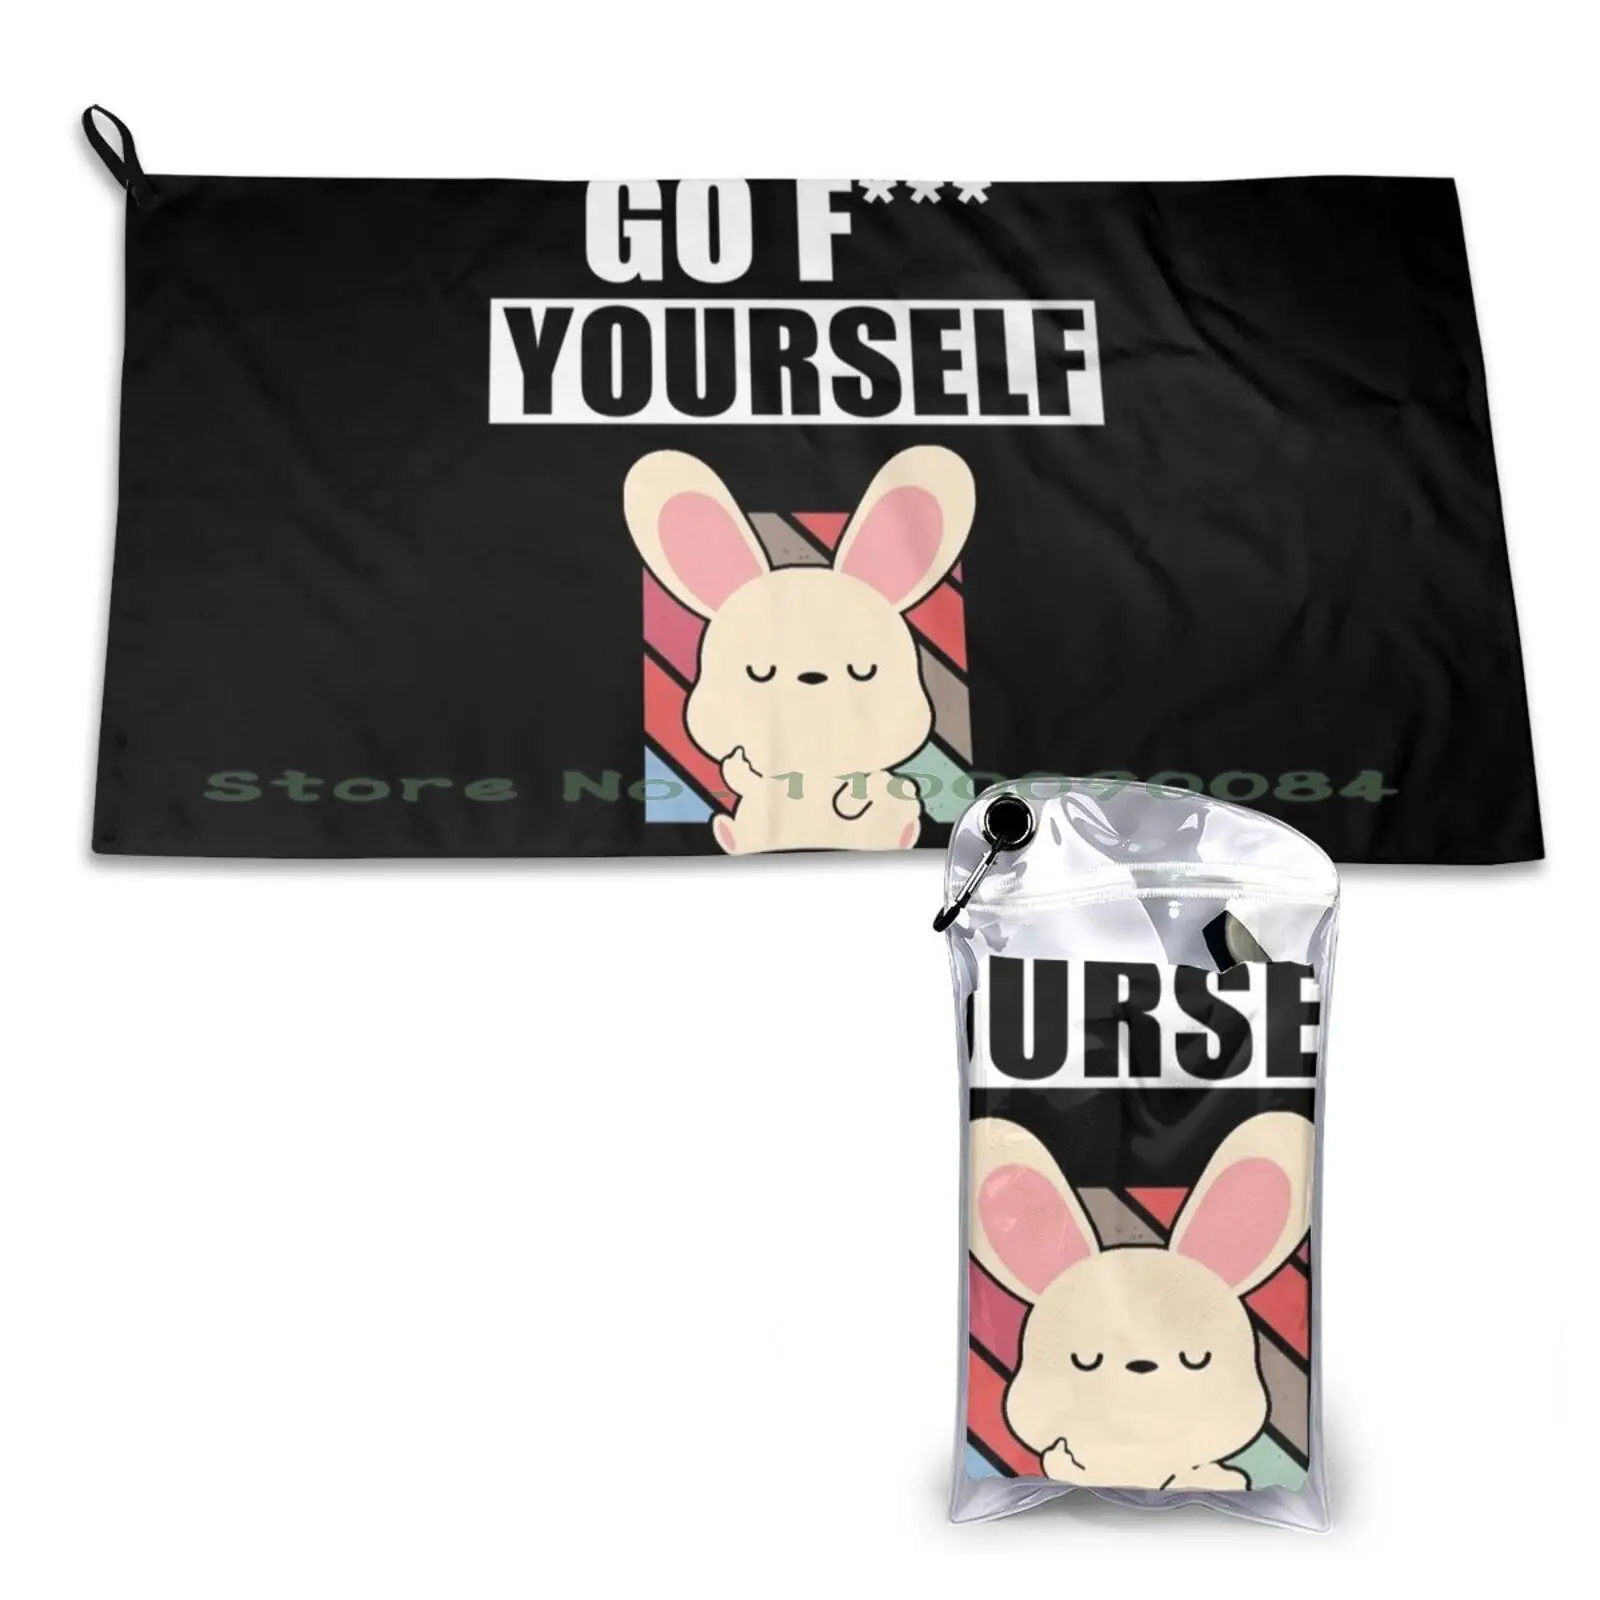 

Go Yourself Quick Dry Towel Gym Sports Bath Portable Never Forget Retro Vintage Cassette Tape Graphic Novelty Mens Funny Forget